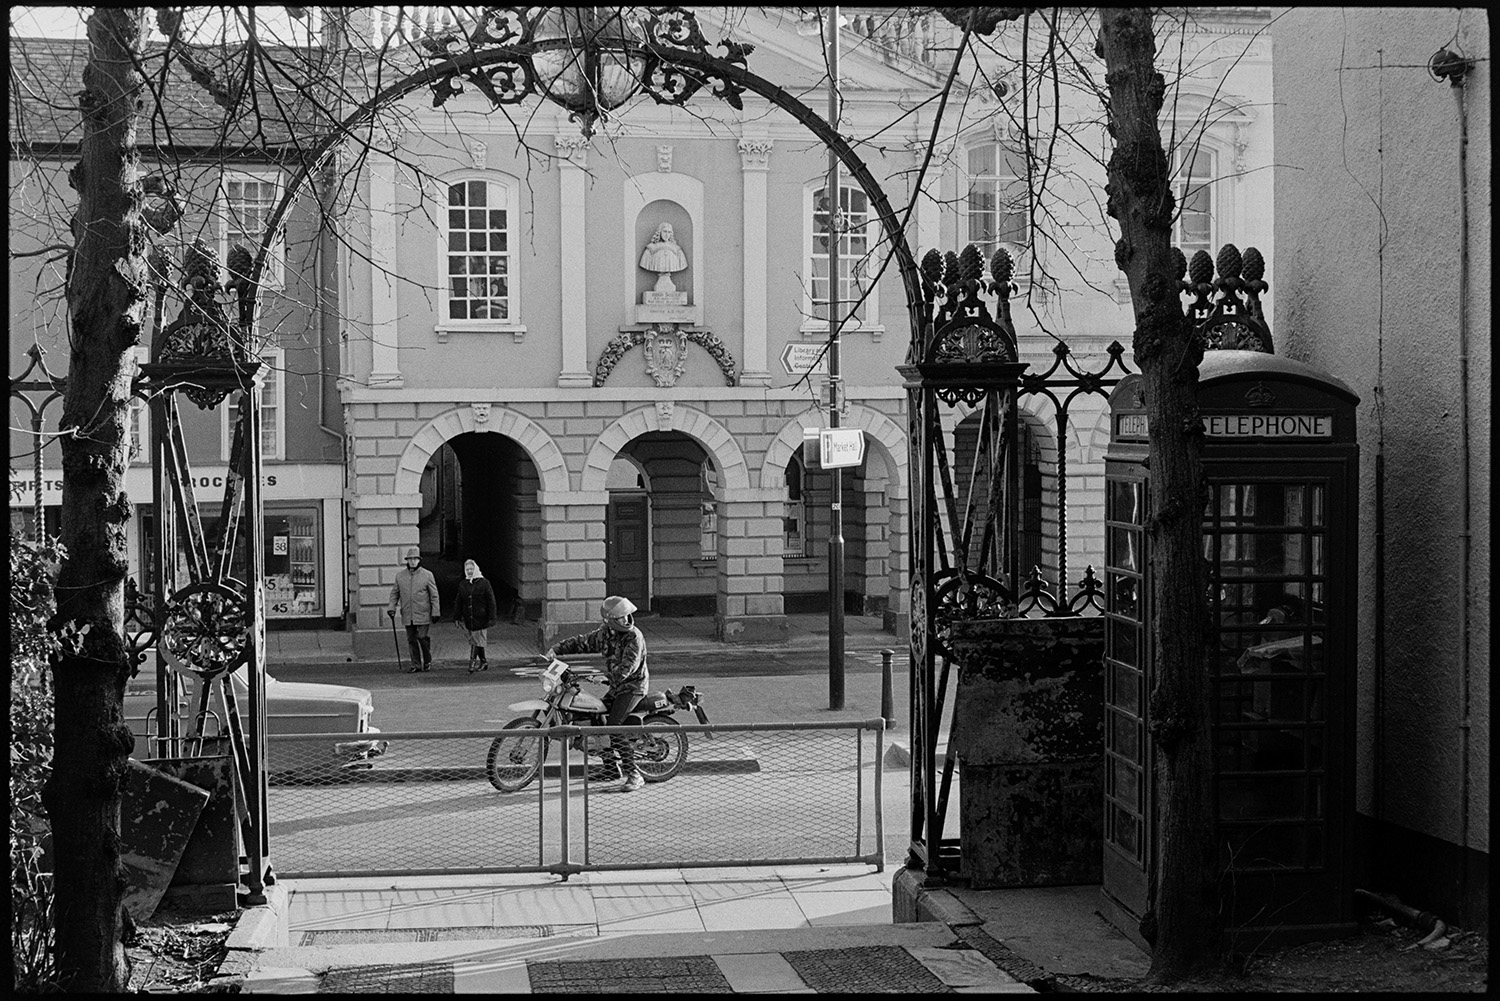 Entrance to avenue of lime trees, wrought iron arch and view of town hall. 
[A wrought iron archway leading to an avenue of lime trees in South Molton. A telephone box can be seen behind the archway. Through the archway South Molton town hall and a motorcyclist about to set off along the street is visible.]